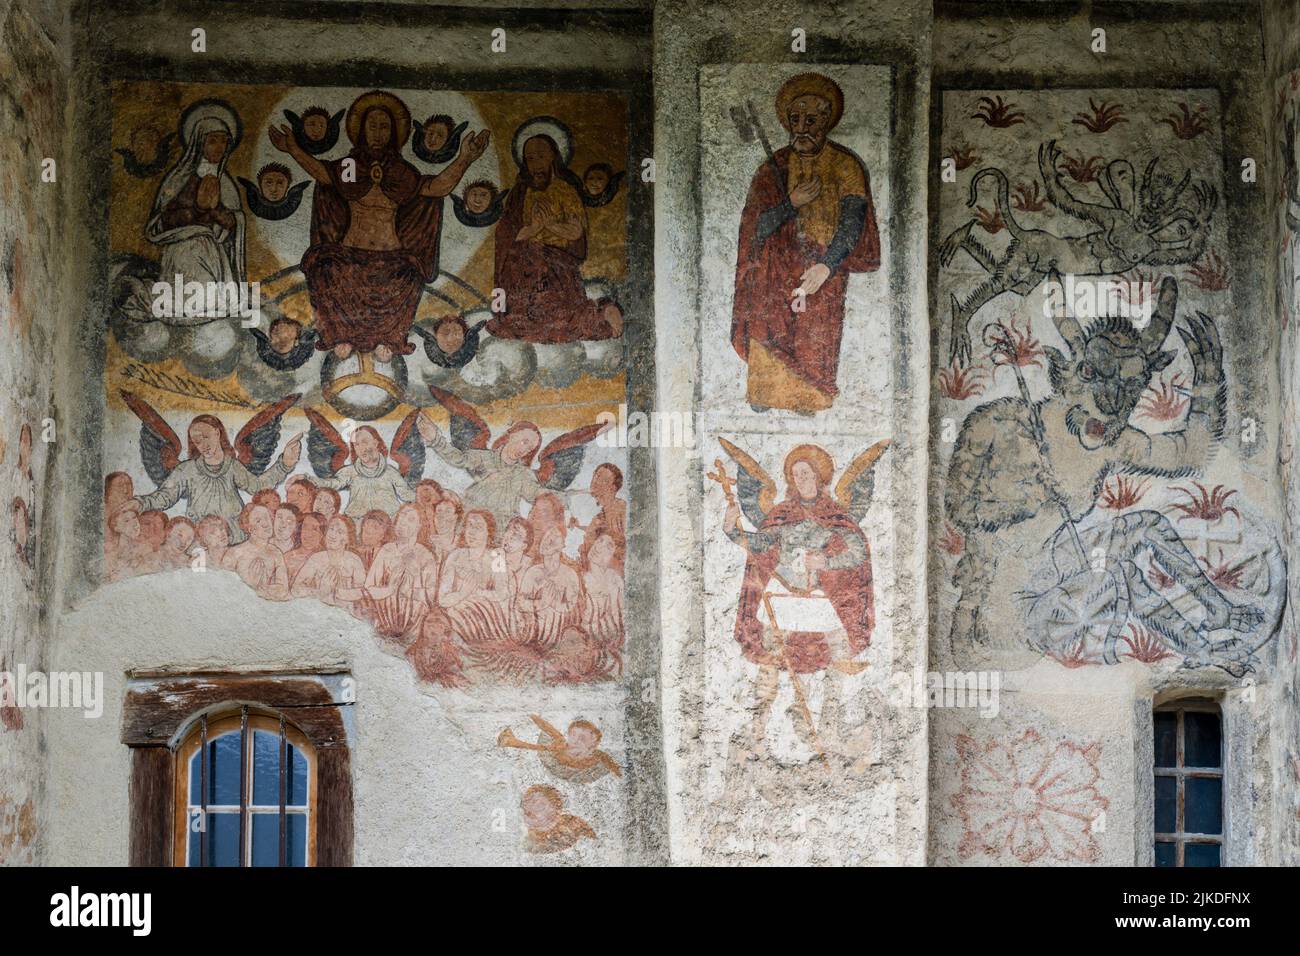 wall paintings of hell and the devil, Romanesque church, Mont village, Louron valley, Occitanie, Pyrenean mountain range, France. Stock Photo